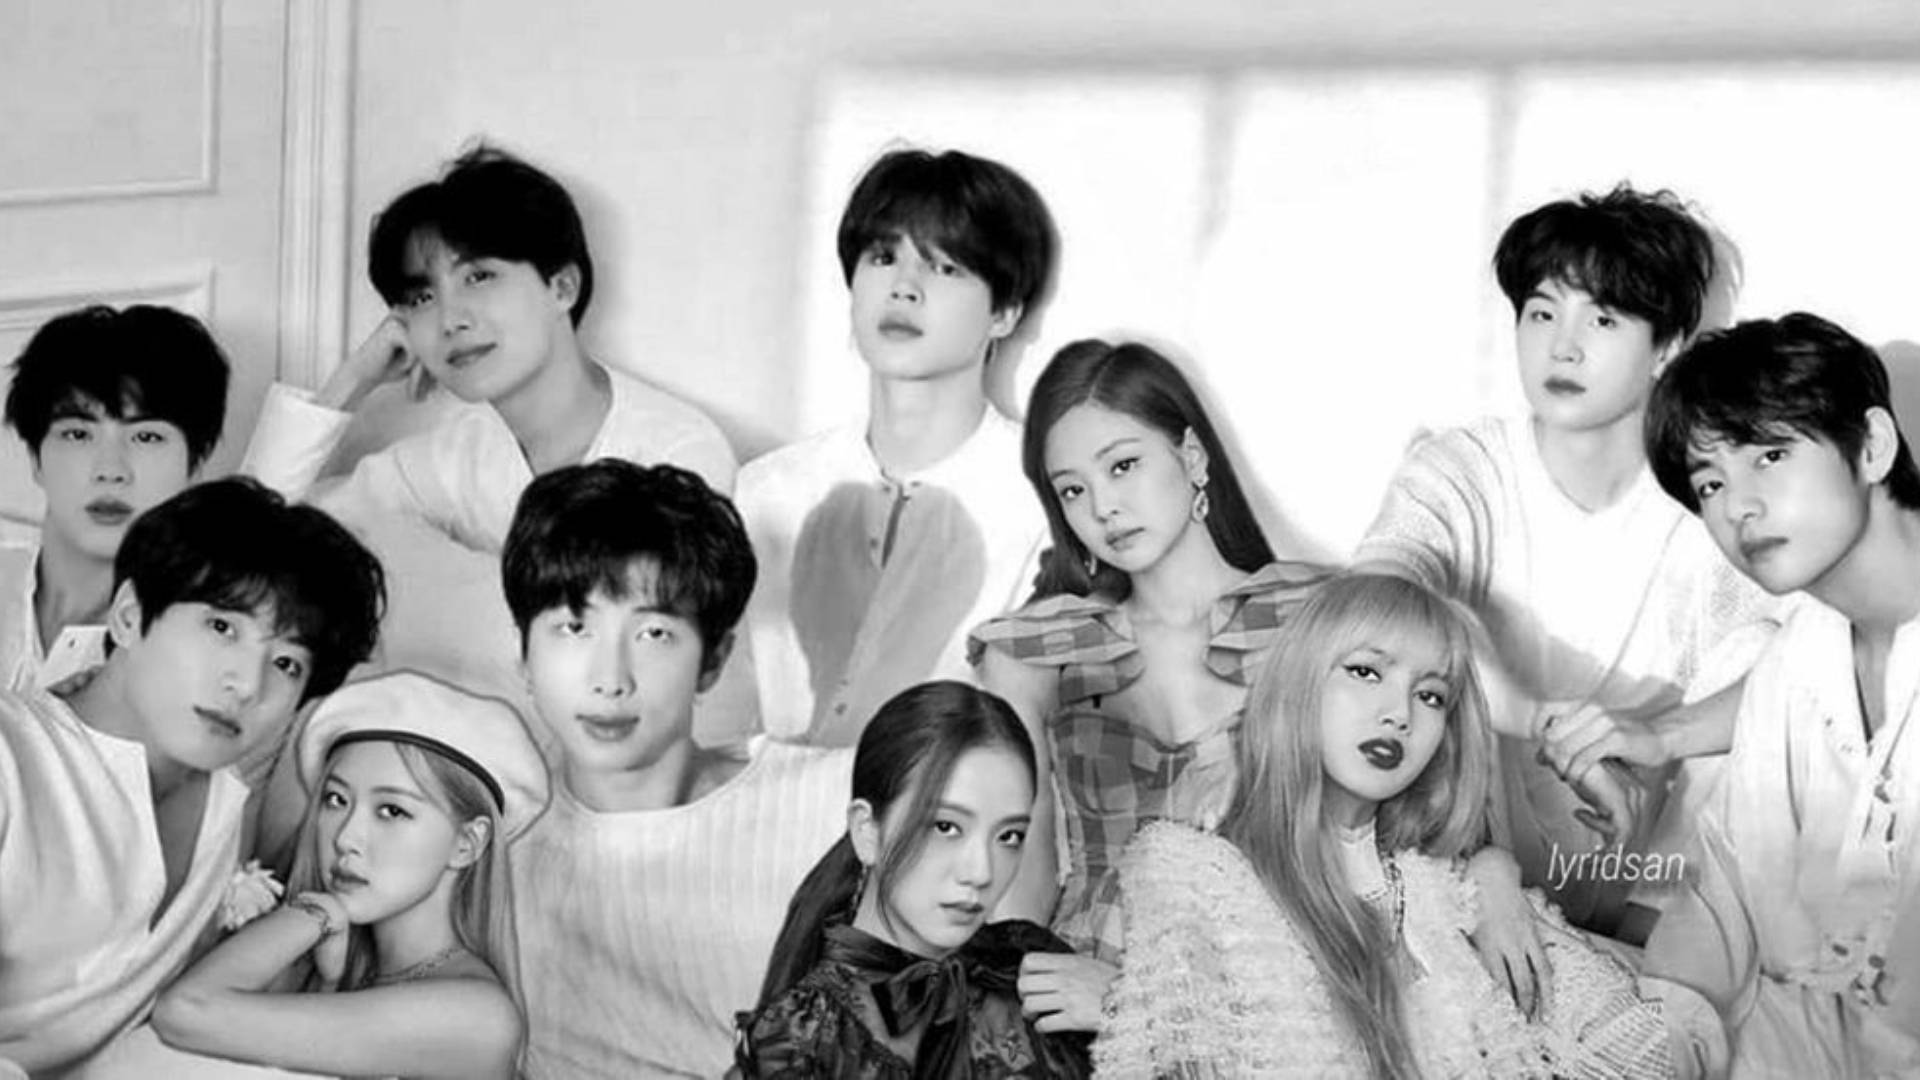 Bts And Blackpink Grayscale